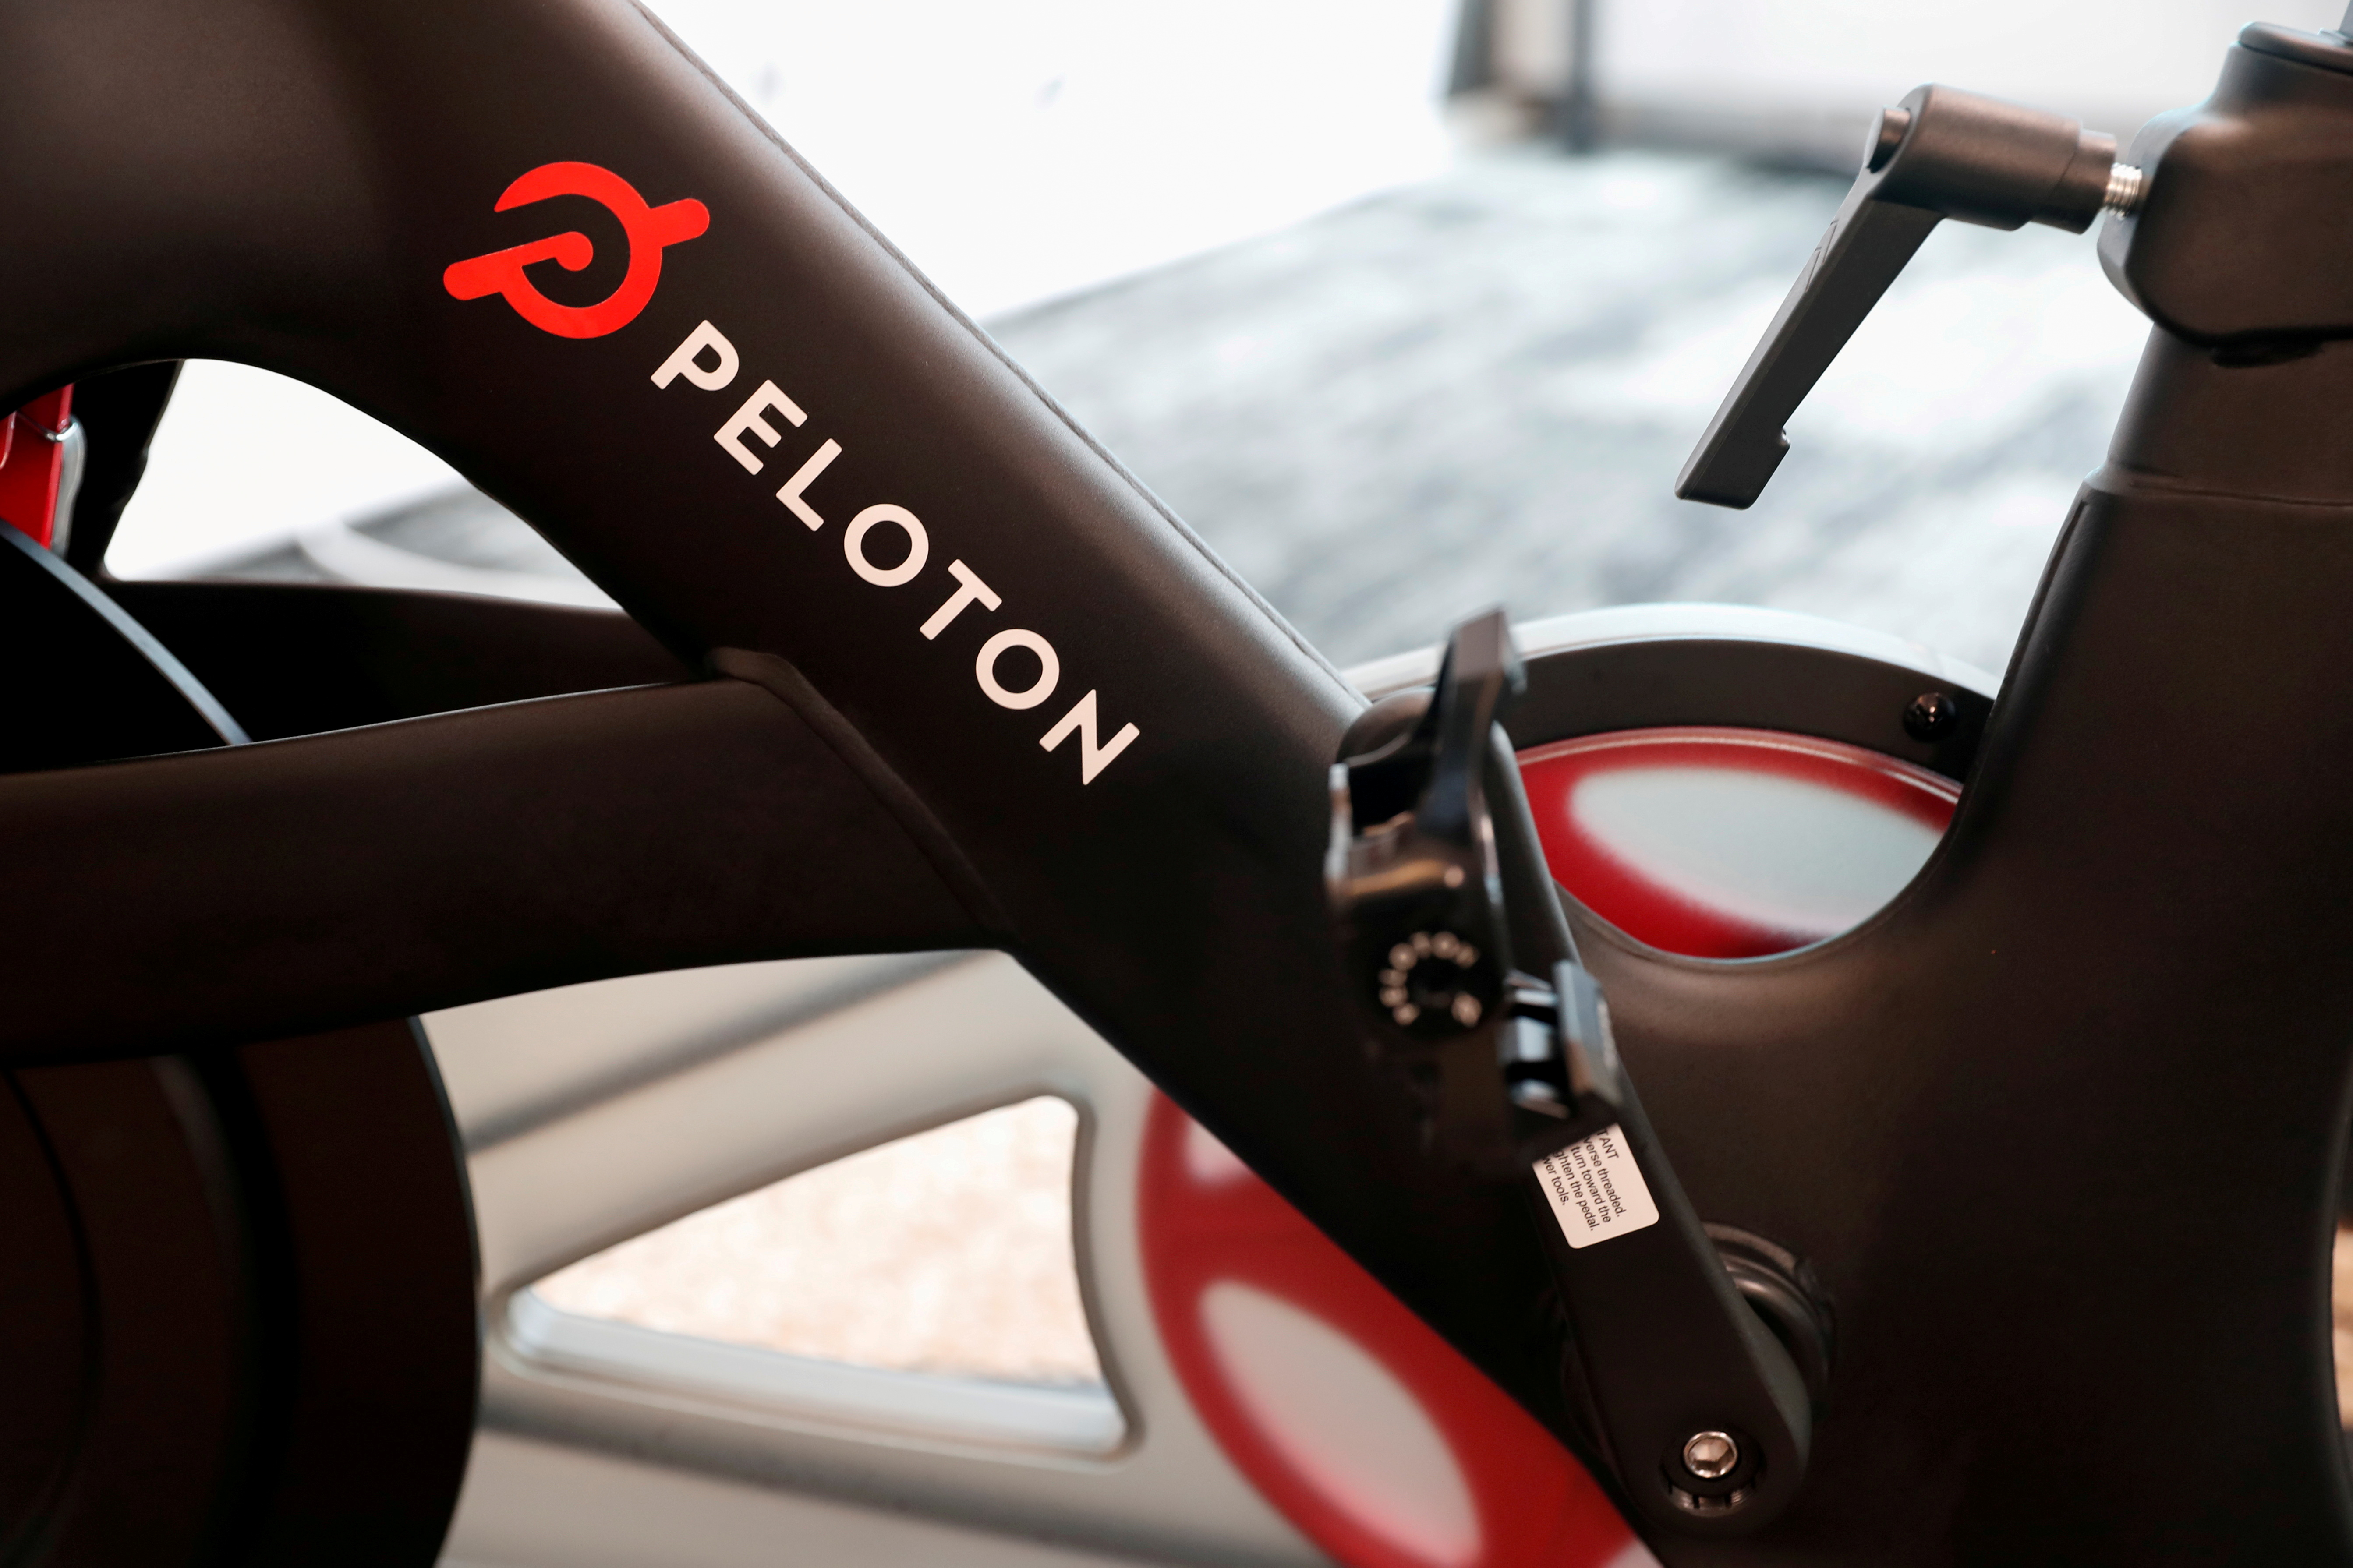 A Peloton exercise bike is seen after the ringing of the opening bell for the company's IPO at the Nasdaq Market site in New York City, New York, U.S., September 26, 2019. REUTERS/Shannon Stapleton/File Photo